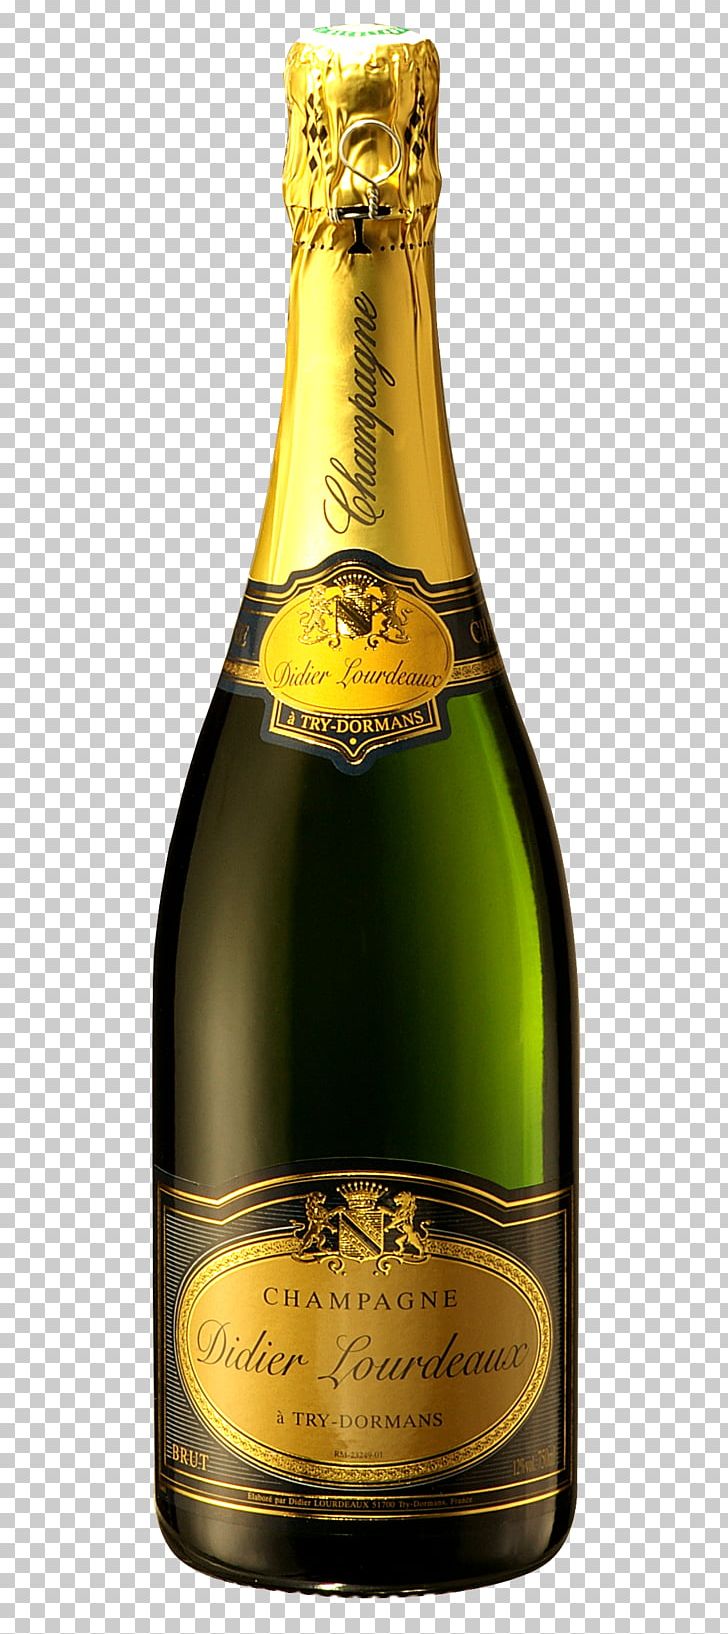 Champagne Wine Glass Bottle PNG, Clipart, Alcoholic Beverage, Bottle, Brut, Champagne, Champagne Bottle Free PNG Download